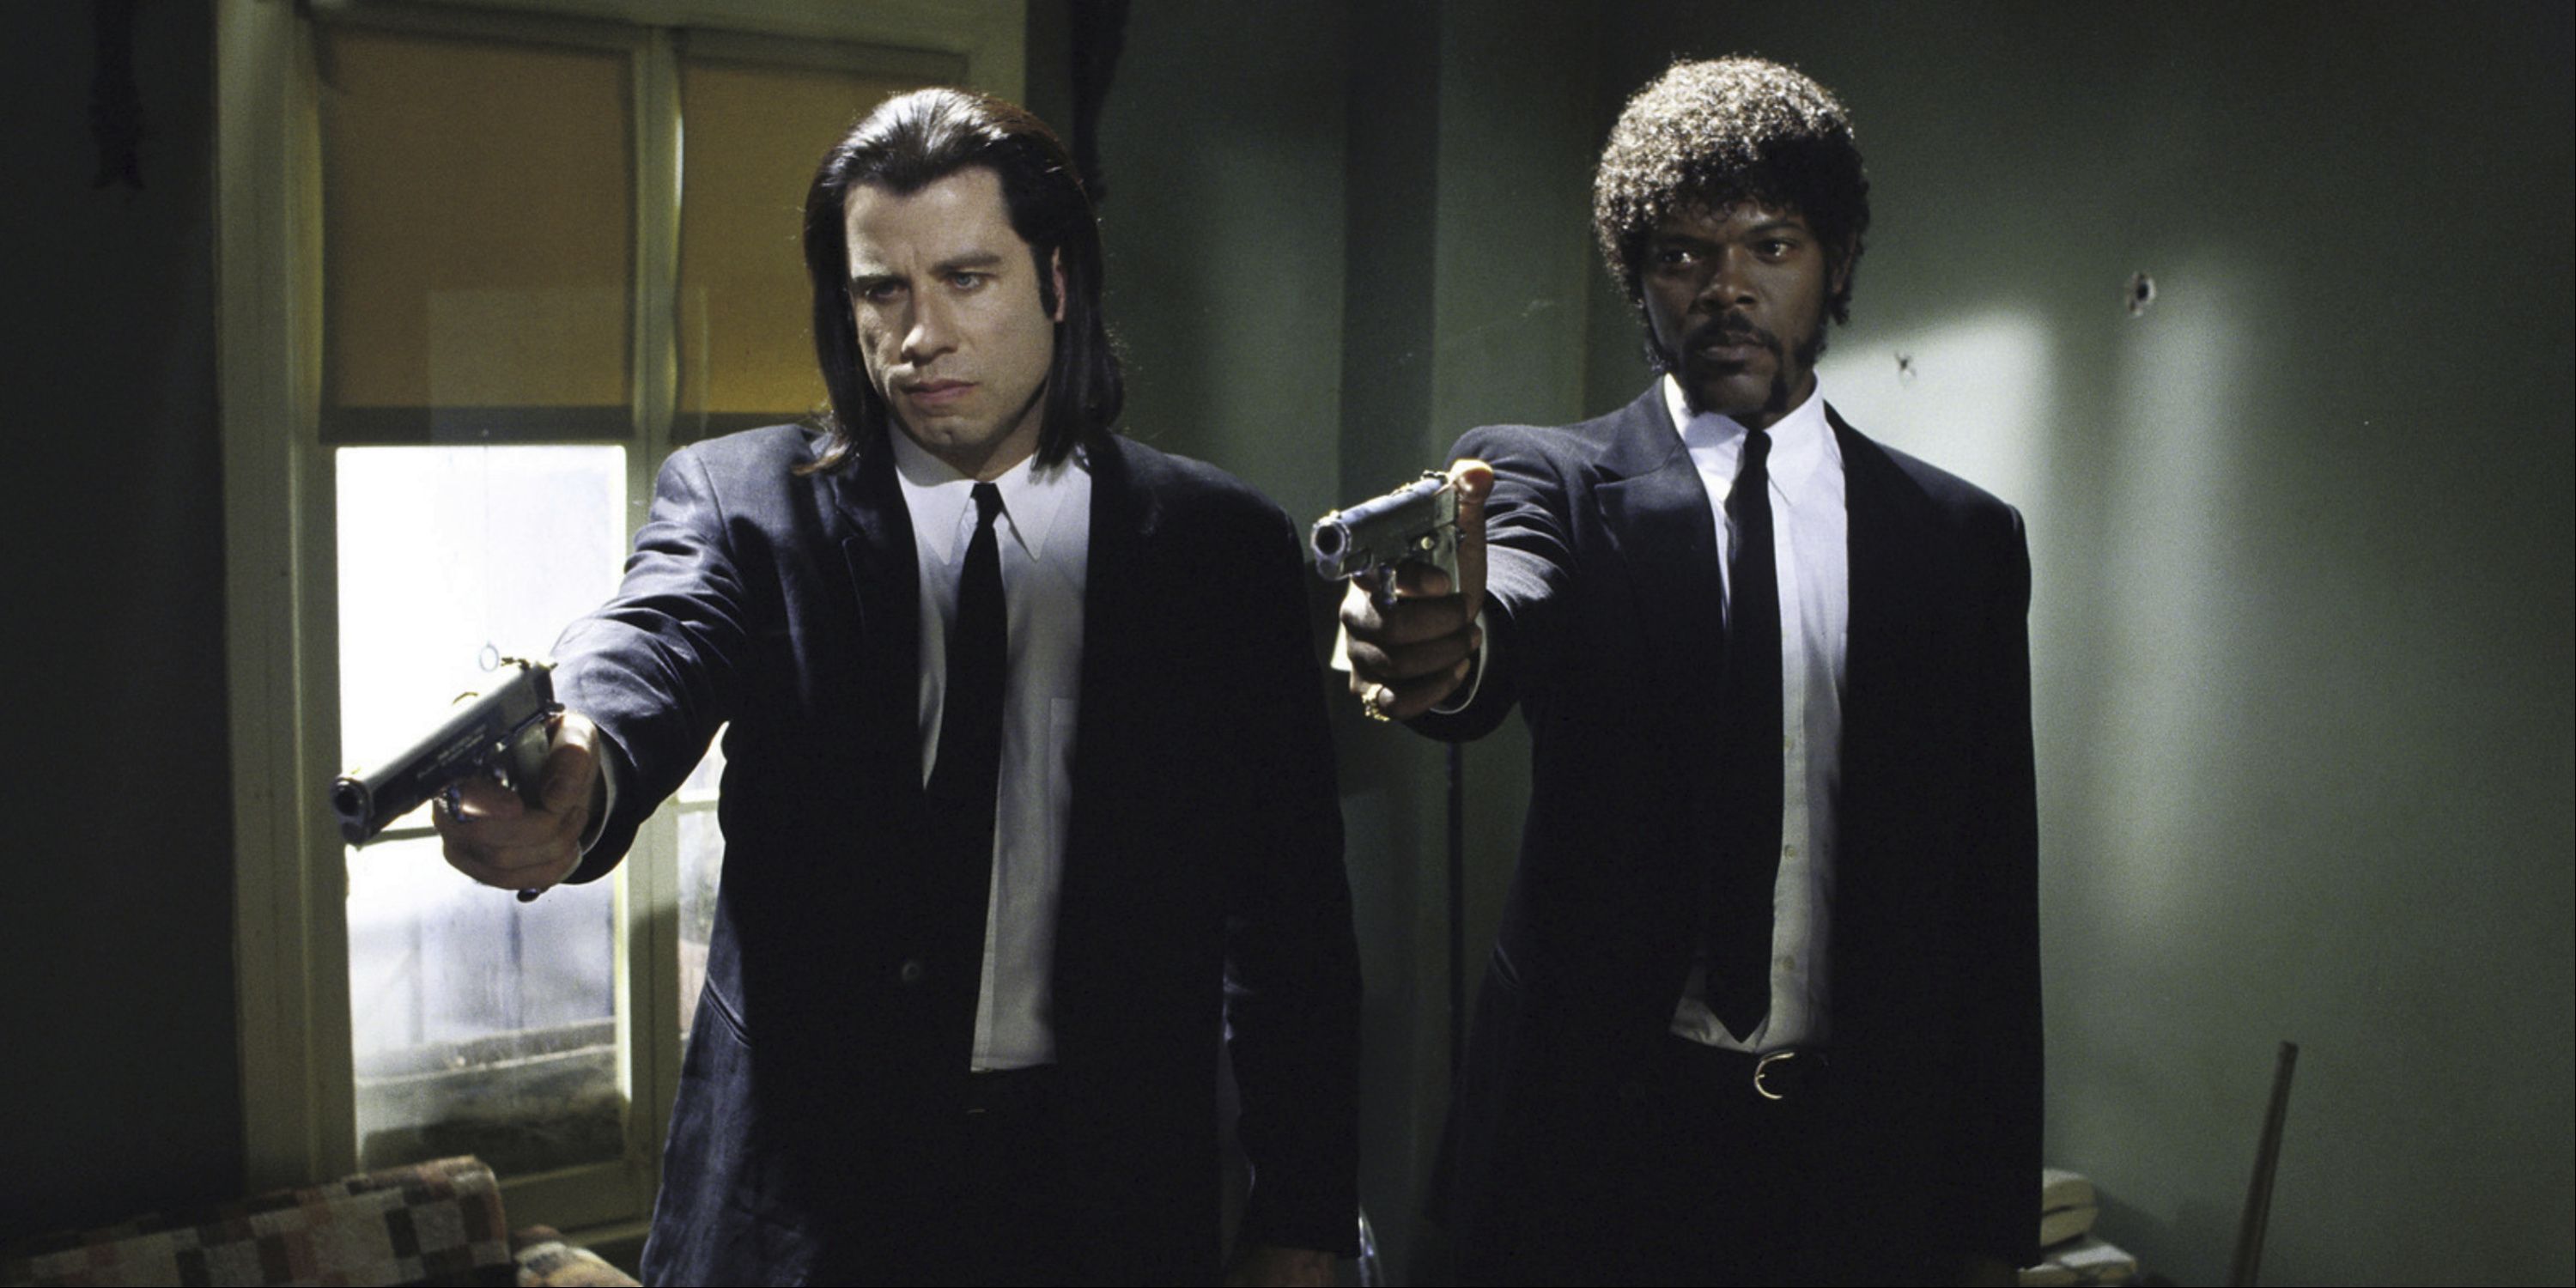 John Travolta as Vincent Vega and Samuel L. Jackson as Jules Winnfield pointing guns about to shoot in Pulp Fiction